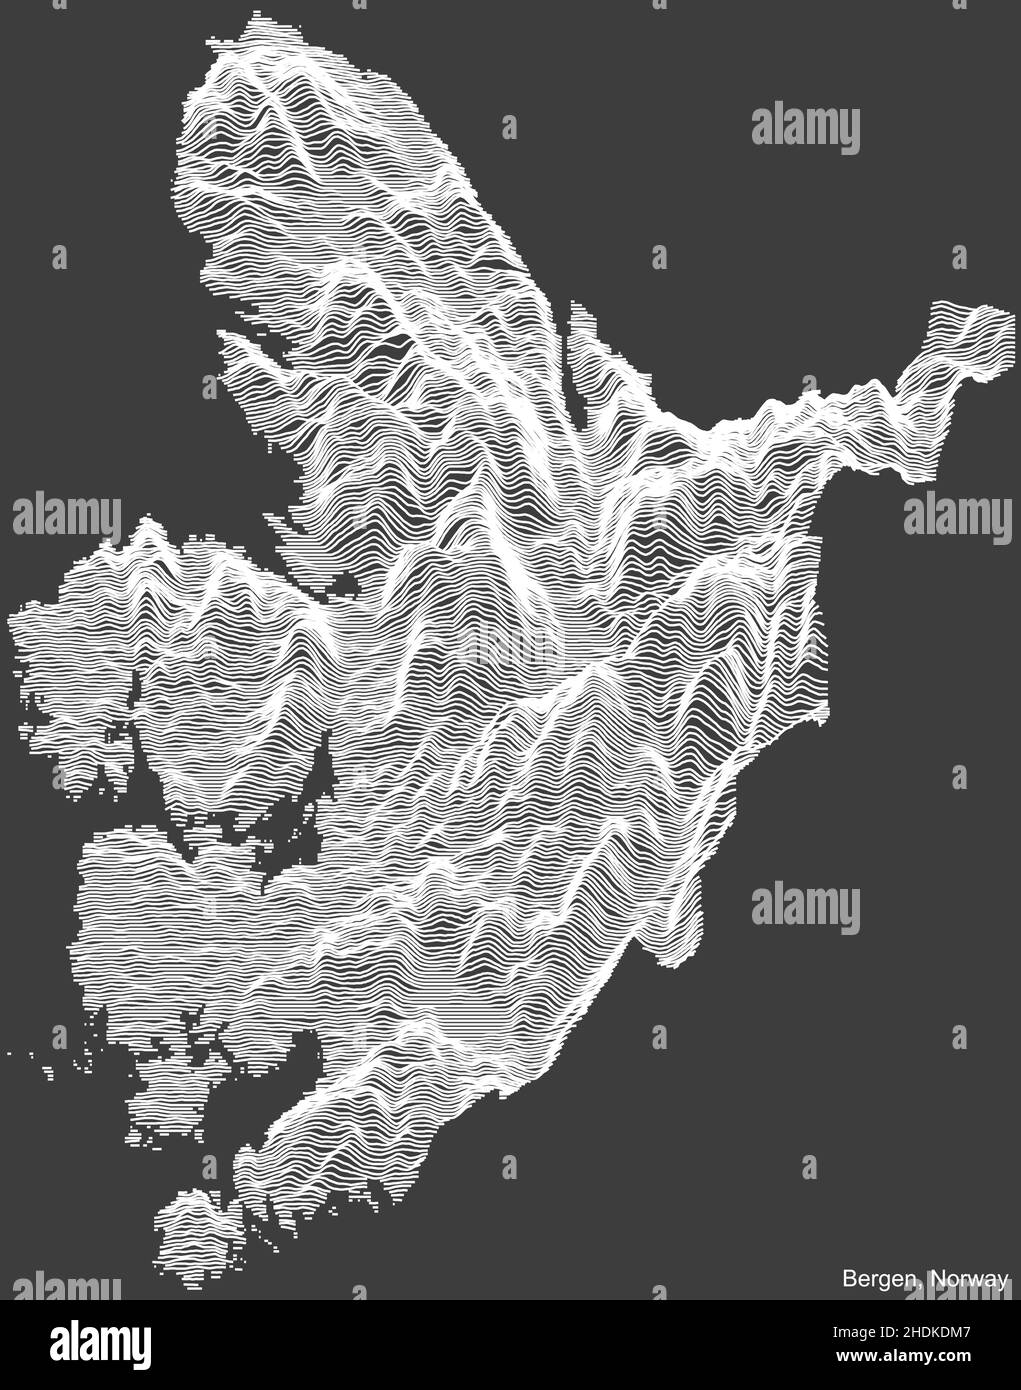 Topographic negative relief map of the city of BERGEN, NORWAY with white contour lines on dark gray background Stock Vector